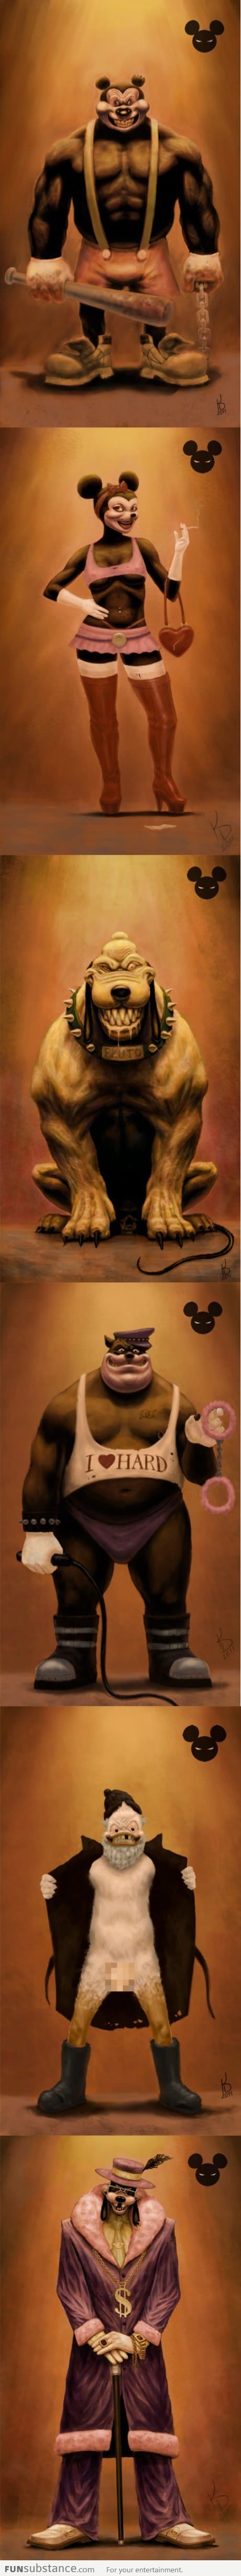 Bad Ass Disney Characters